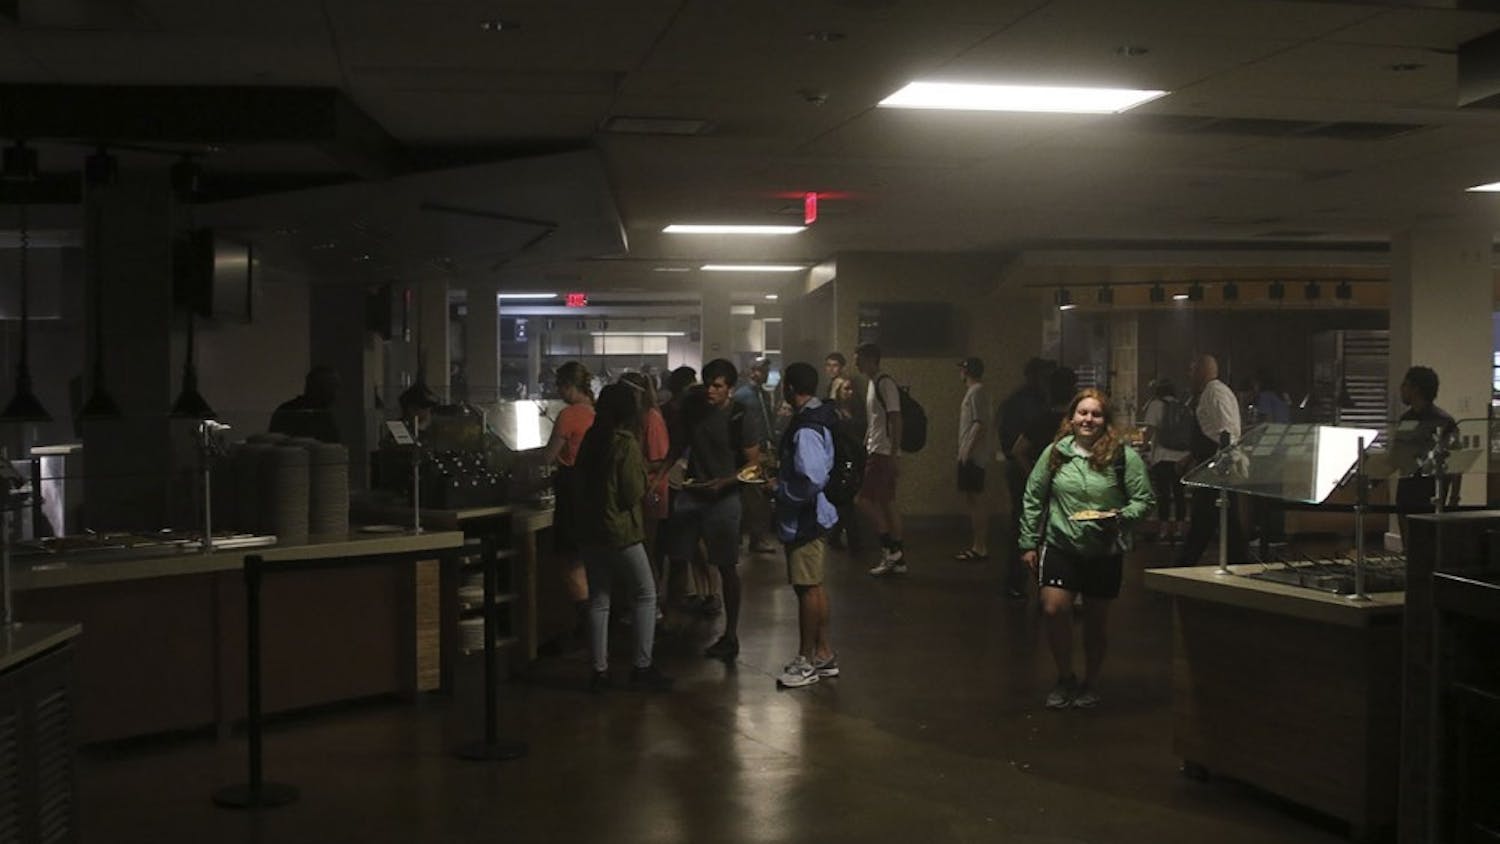 Lenoir dining hall lost power today.